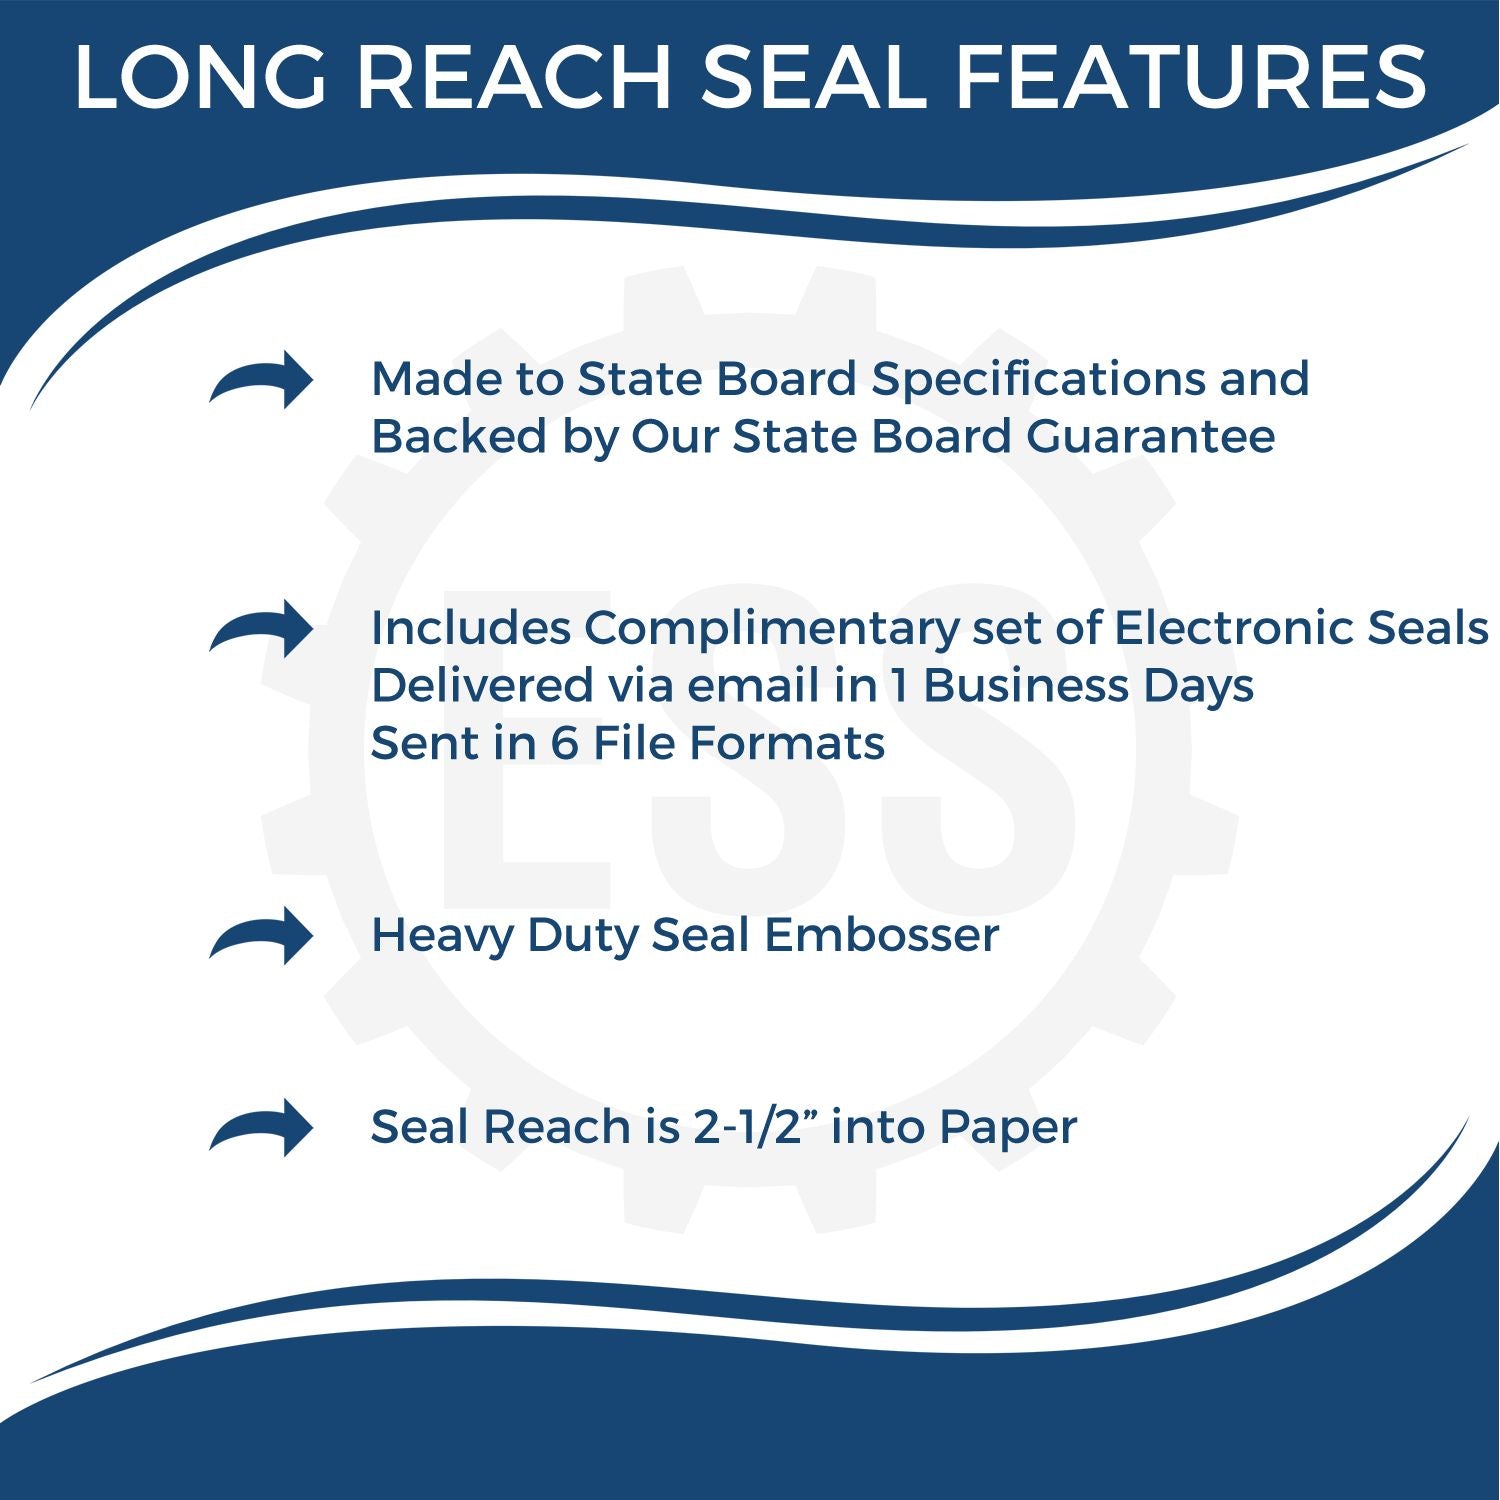 The main image for the Long Reach Florida PE Seal depicting a sample of the imprint and electronic files